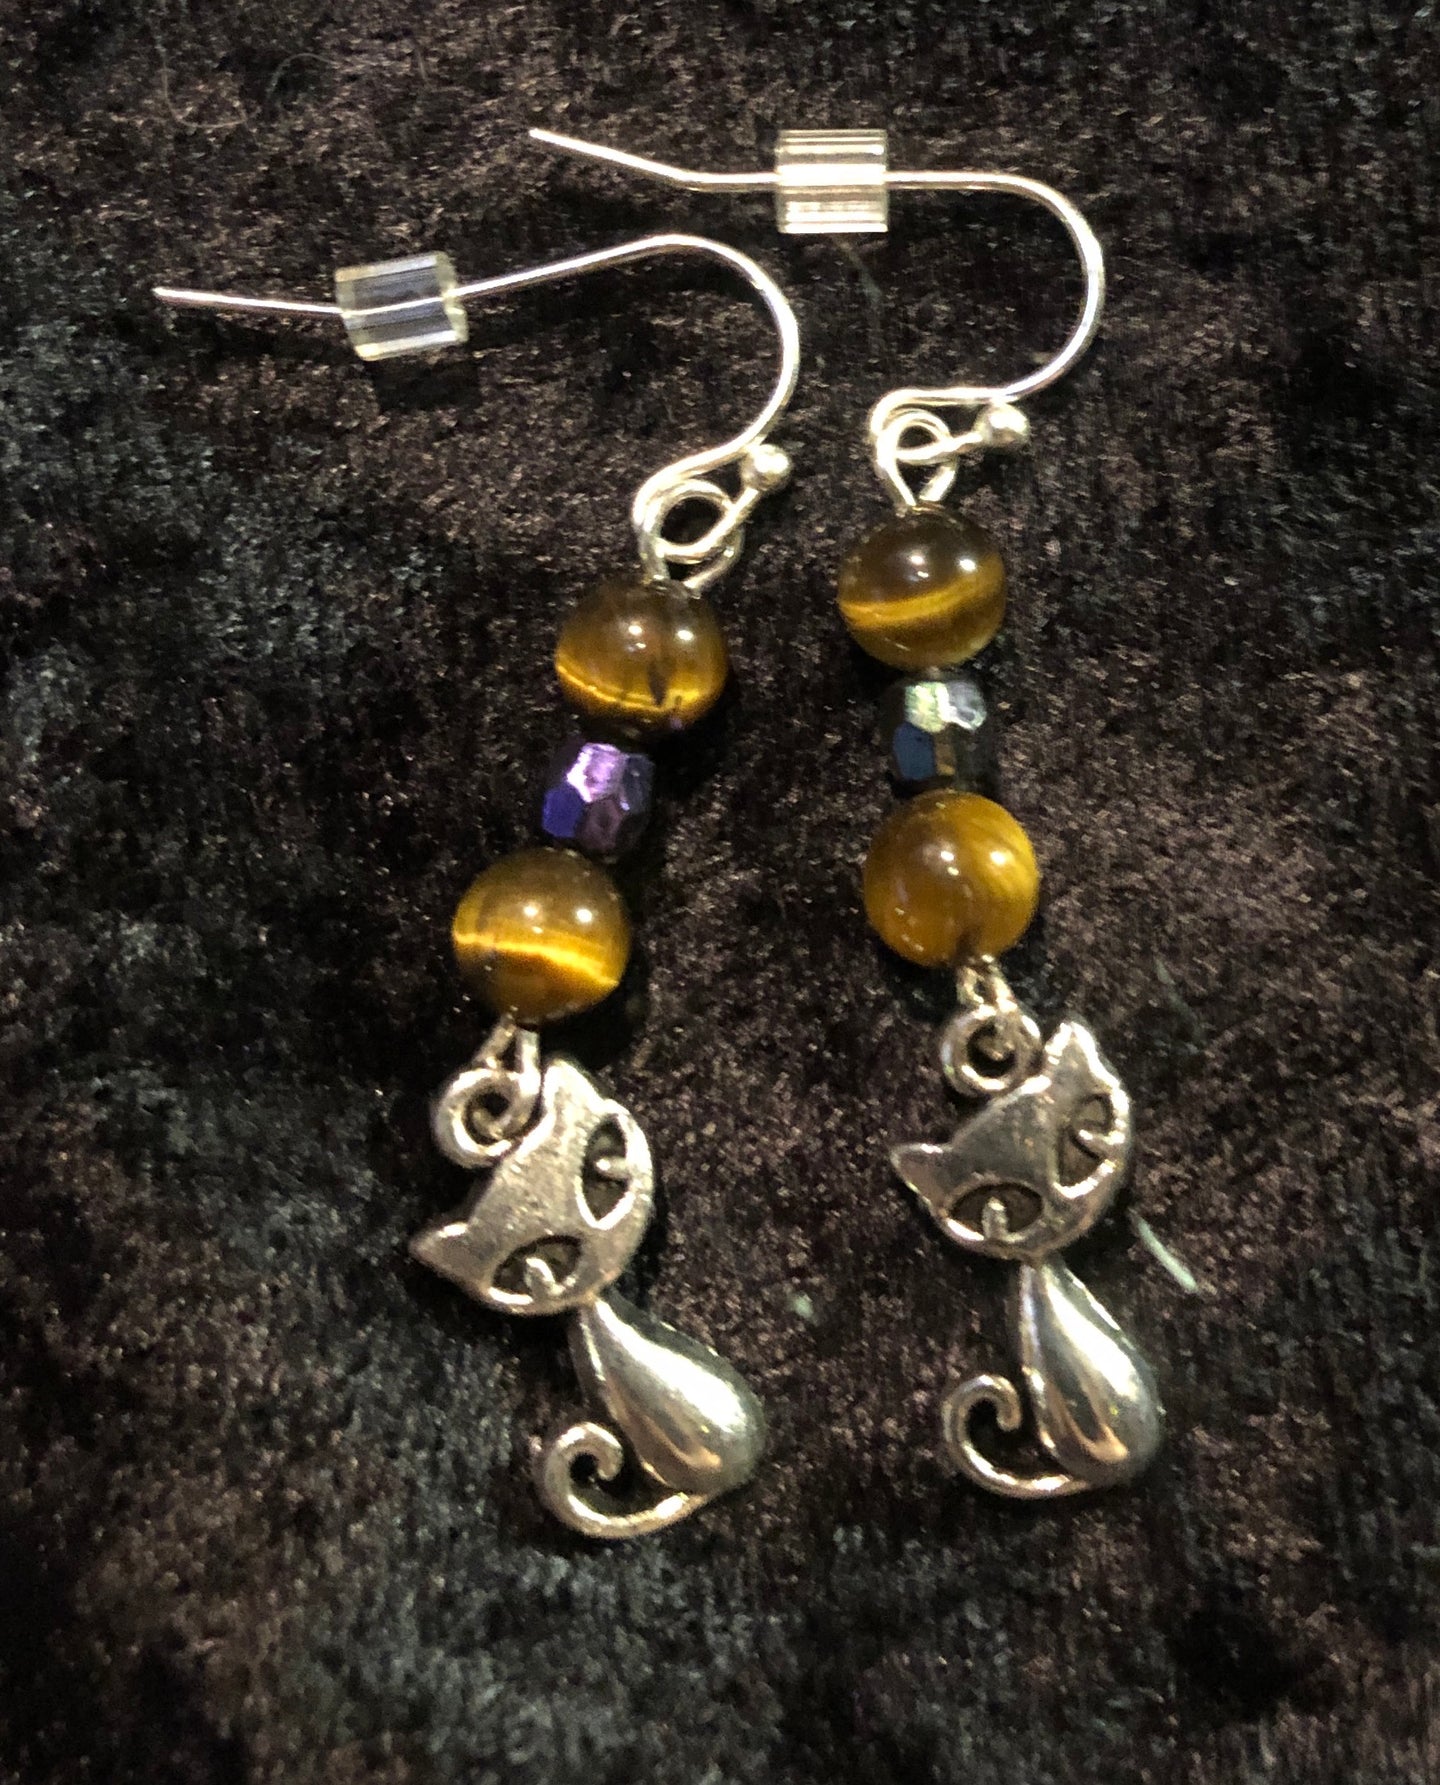 Cats with Tiger's Eye Bead Earrings